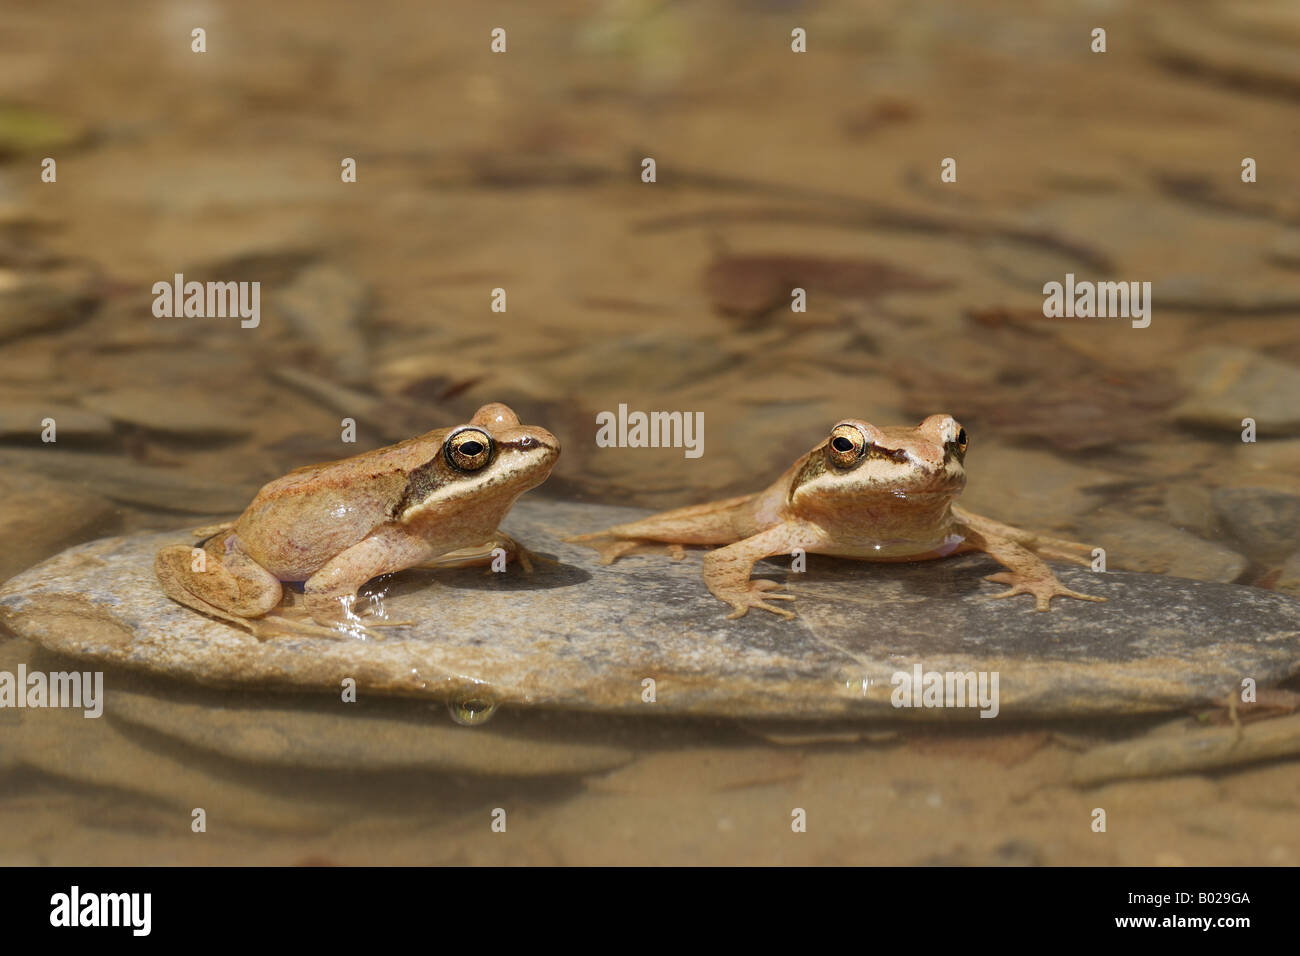 Pyrenean Frog (Rana pyrenaica), two individuals sitting on a stone in shallow water Stock Photo